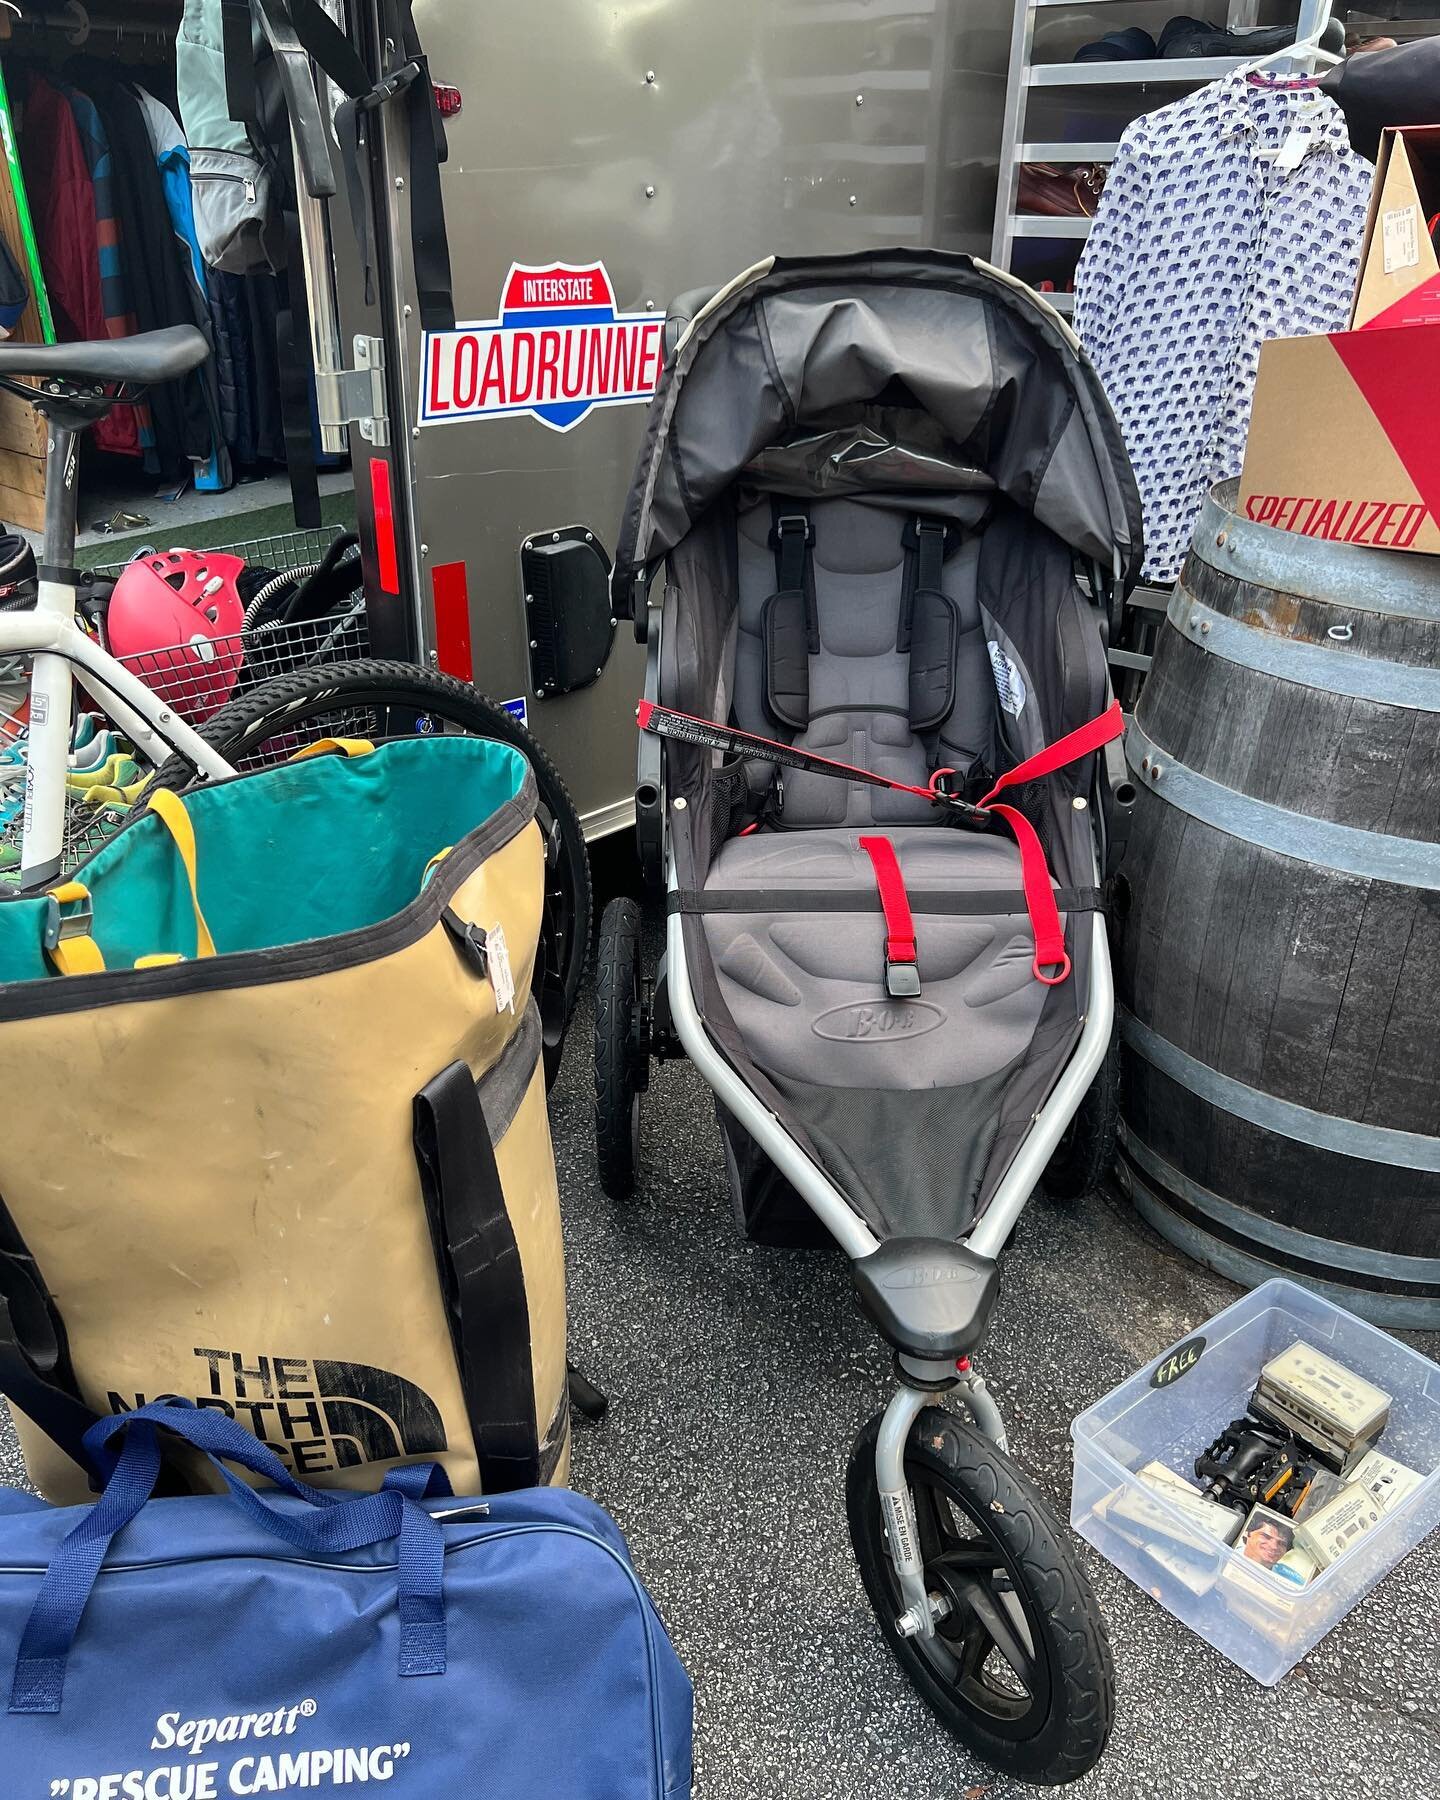 Rest day today, but we&rsquo;ll be back up and running soon! Speaking of running, we just got in this bang-up Bob jogger (Flex 3 stroller) that&rsquo;s looking for a wonderful new home! Folds flat for easy transport. Message for details! #bobstroller